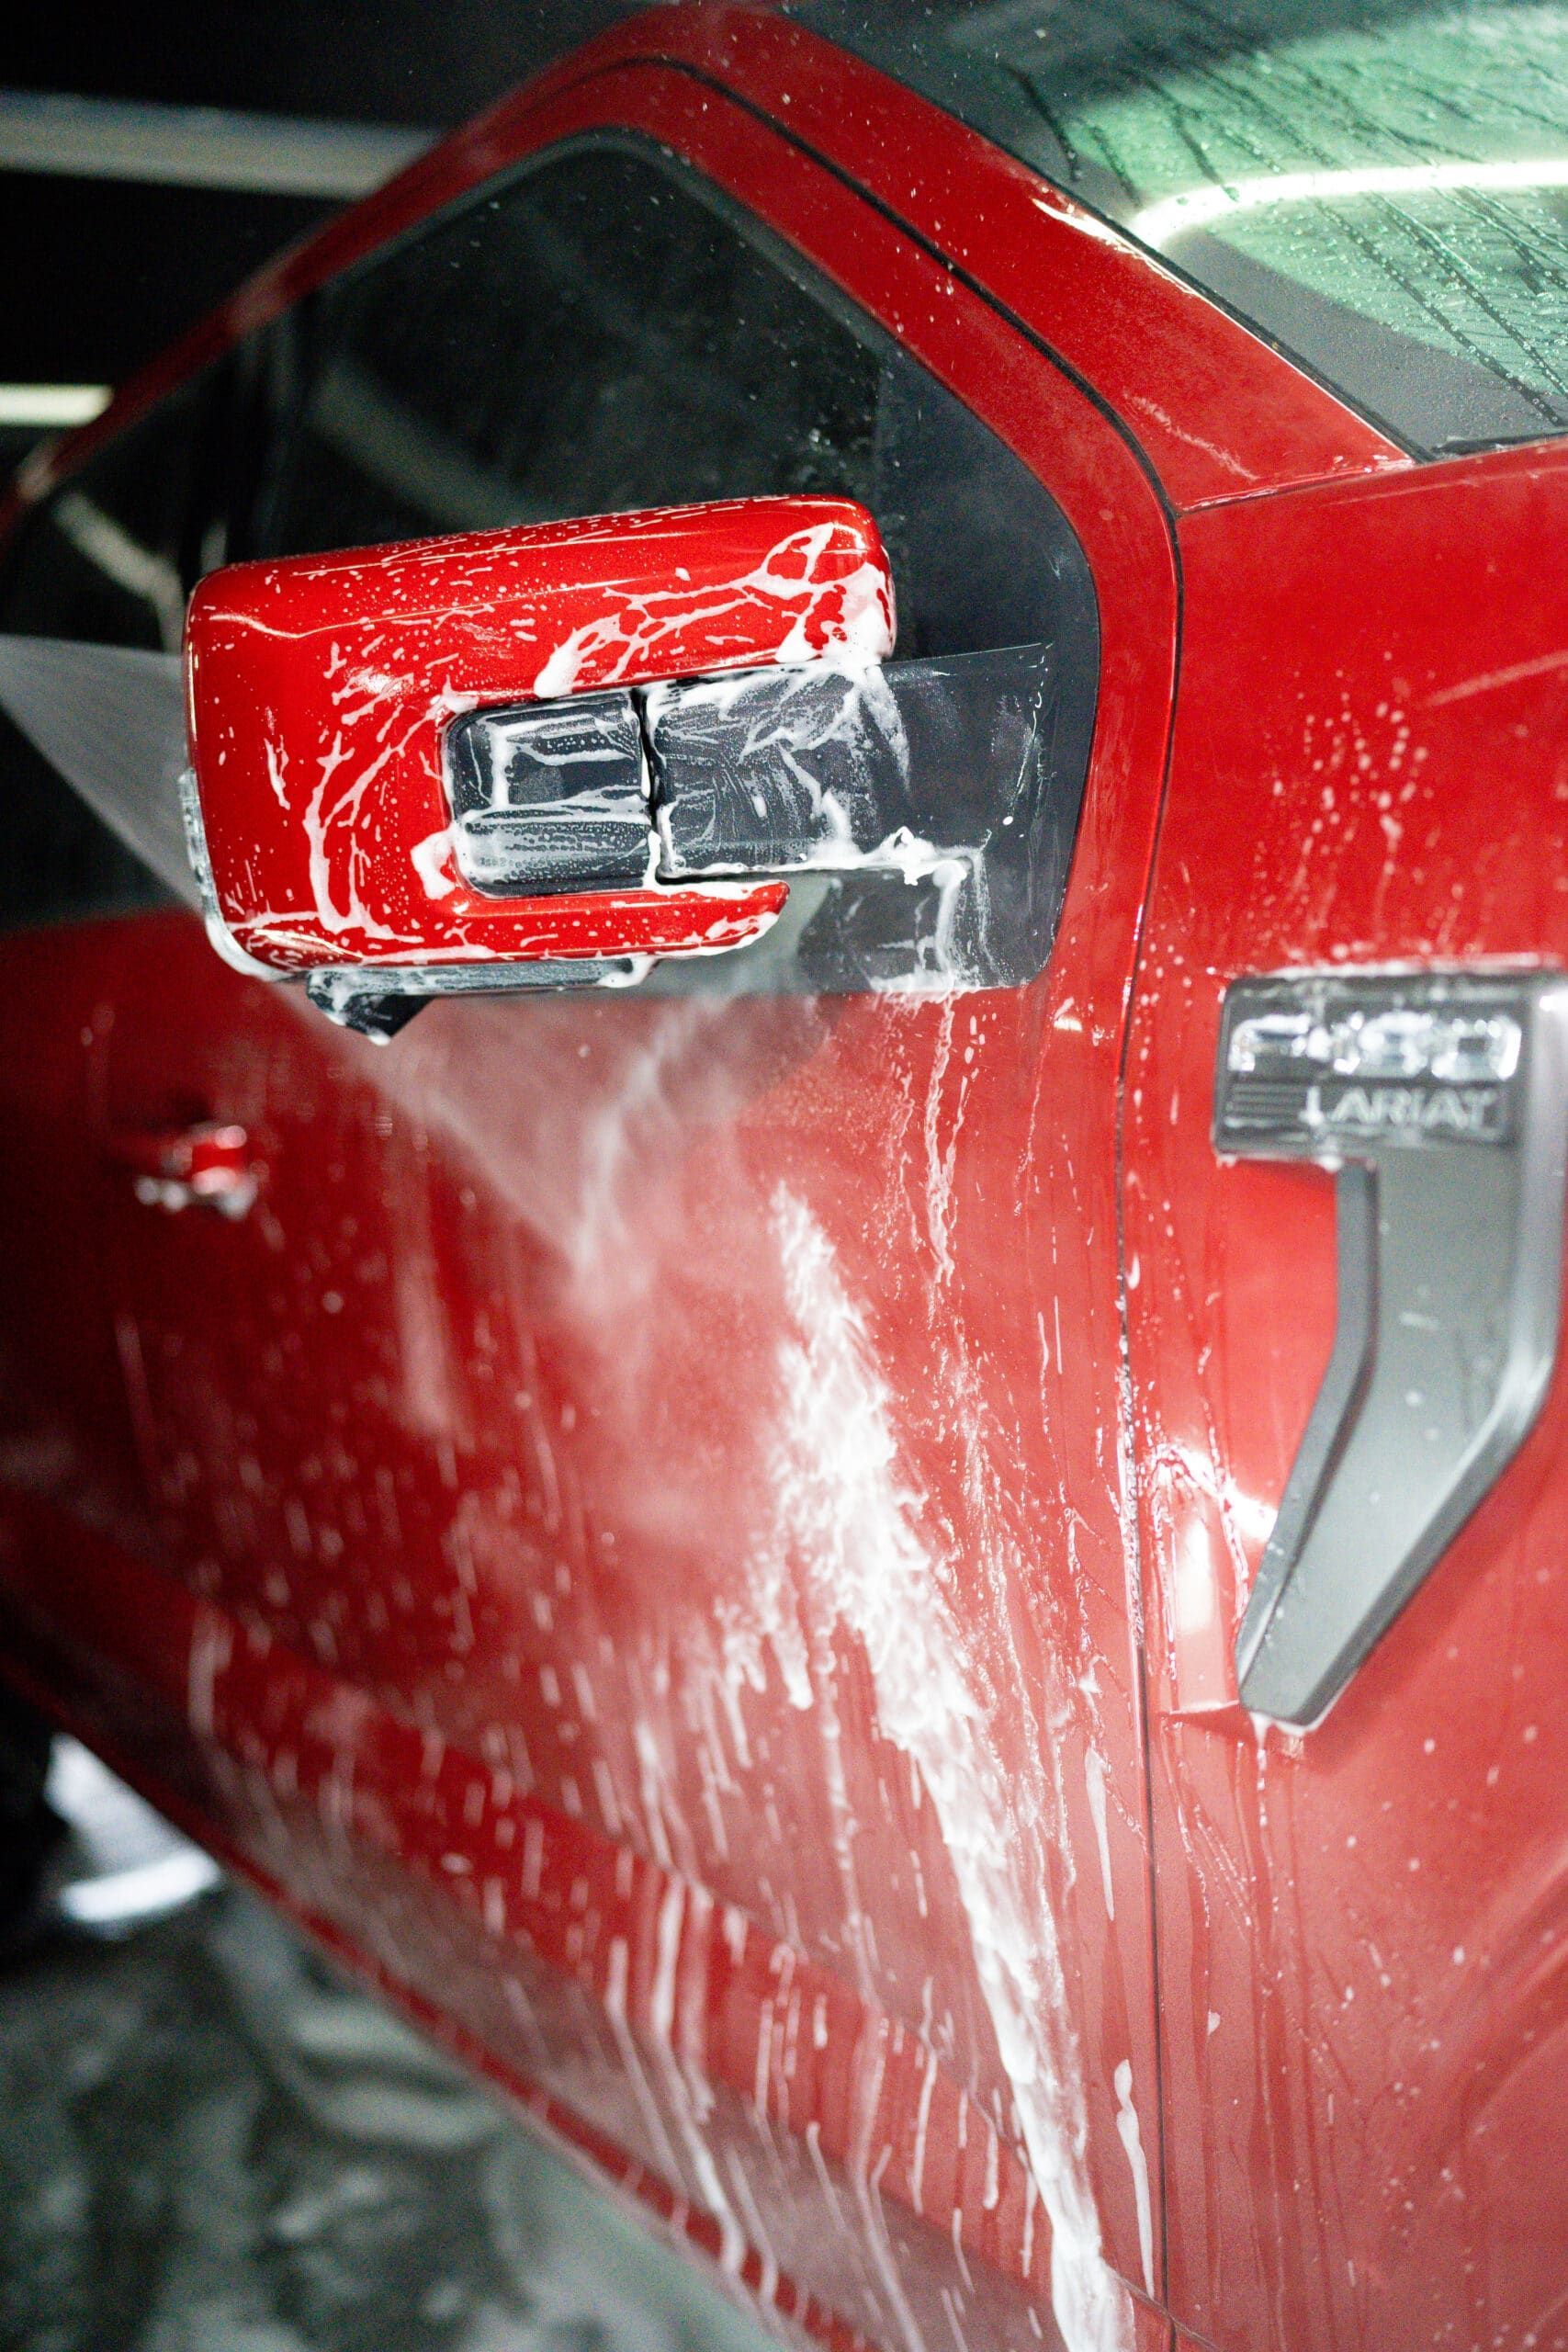 A red ford truck is being washed with soap and water